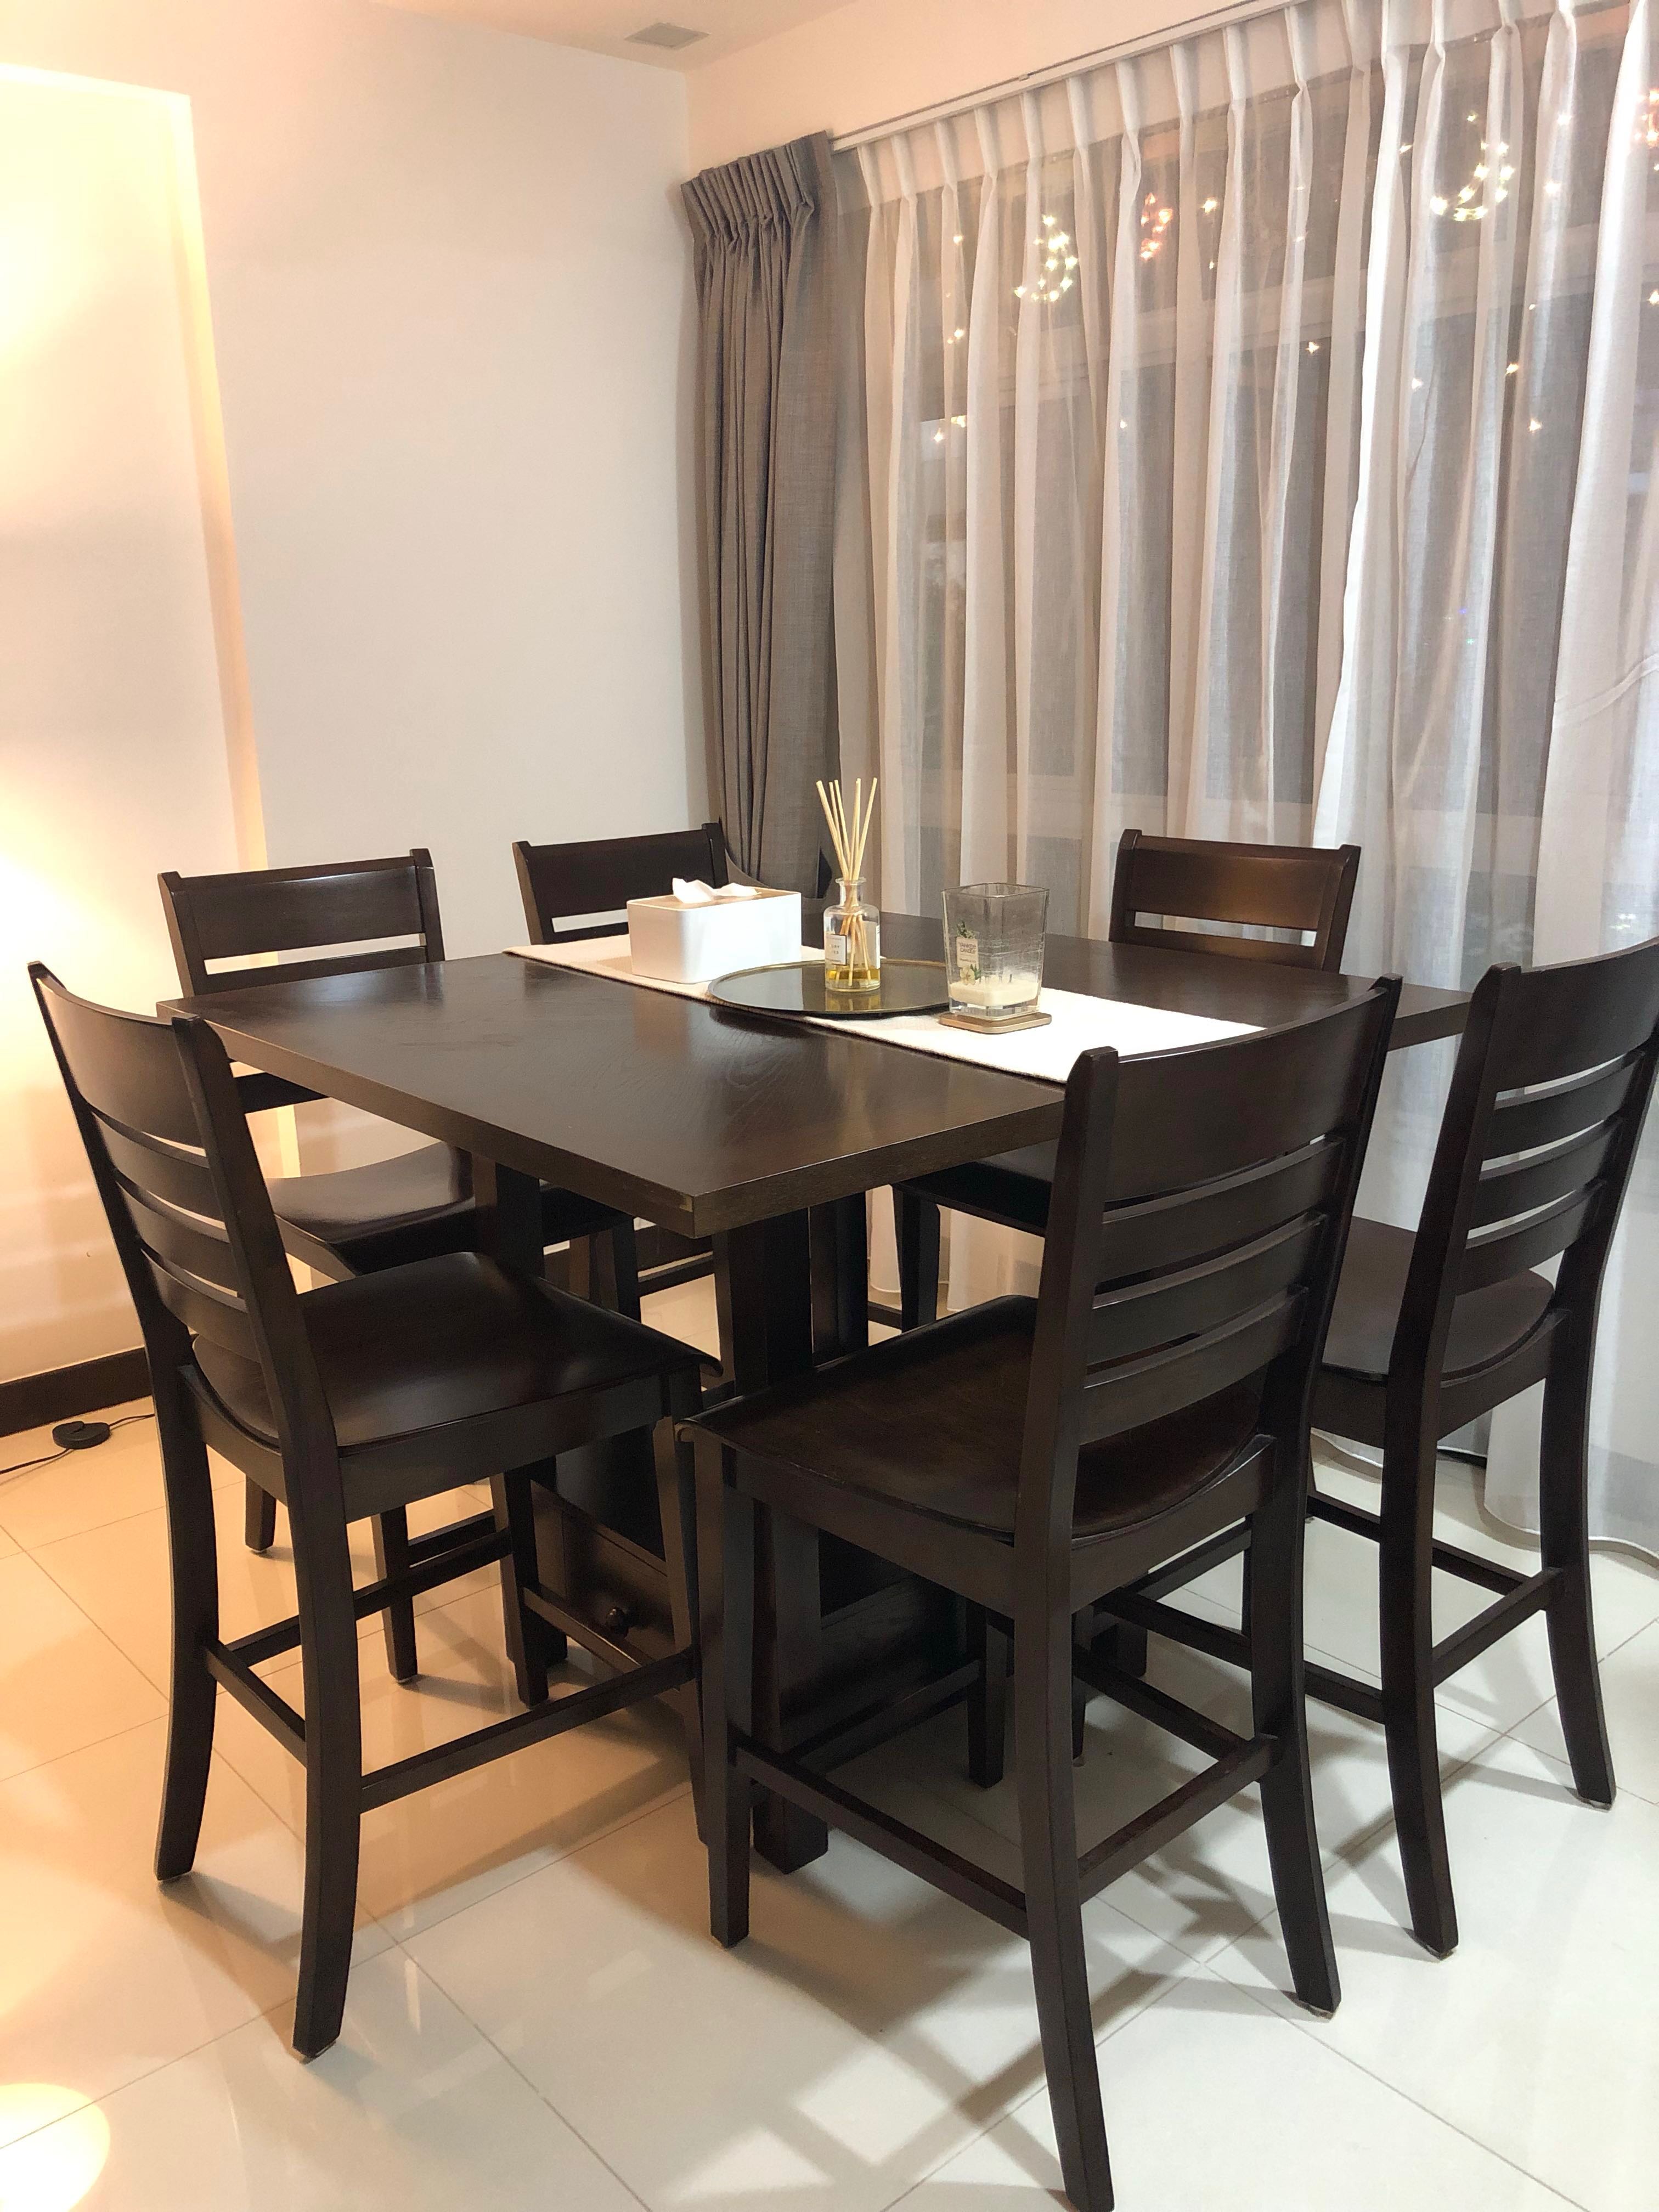 High Dining Table And Chair, High Seat Dining Room Chairs